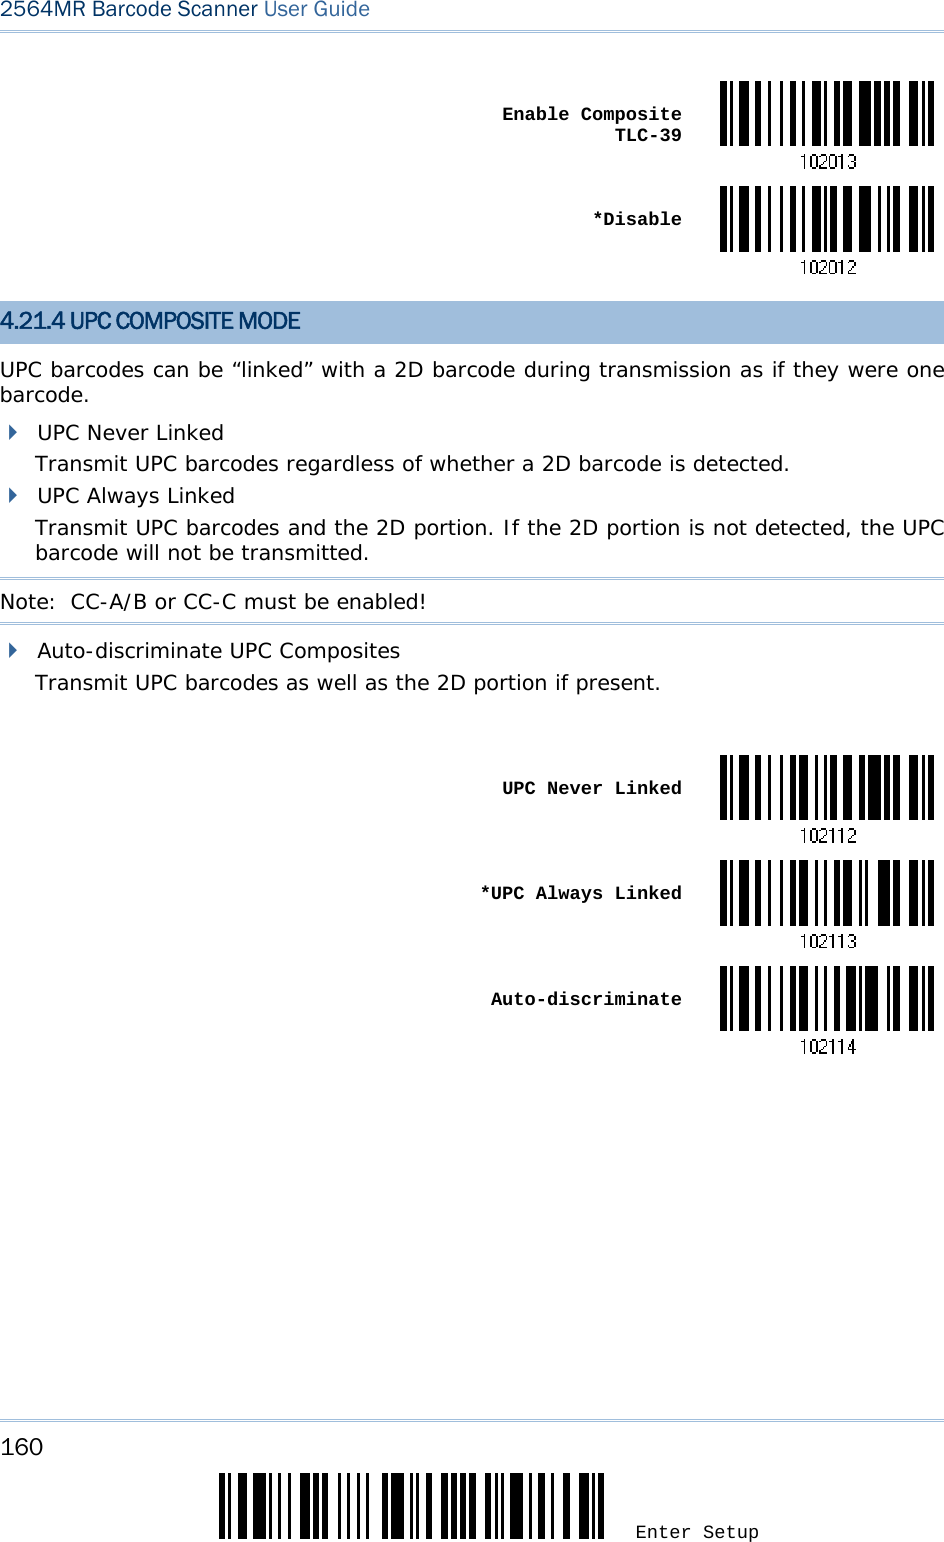 160 Enter Setup 2564MR Barcode Scanner User Guide   Enable Composite TLC-39 *Disable4.21.4 UPC COMPOSITE MODE UPC barcodes can be “linked” with a 2D barcode during transmission as if they were one barcode.  UPC Never Linked Transmit UPC barcodes regardless of whether a 2D barcode is detected.  UPC Always Linked Transmit UPC barcodes and the 2D portion. If the 2D portion is not detected, the UPC barcode will not be transmitted. Note:  CC-A/B or CC-C must be enabled!  Auto-discriminate UPC Composites Transmit UPC barcodes as well as the 2D portion if present.   UPC Never Linked *UPC Always Linked Auto-discriminate